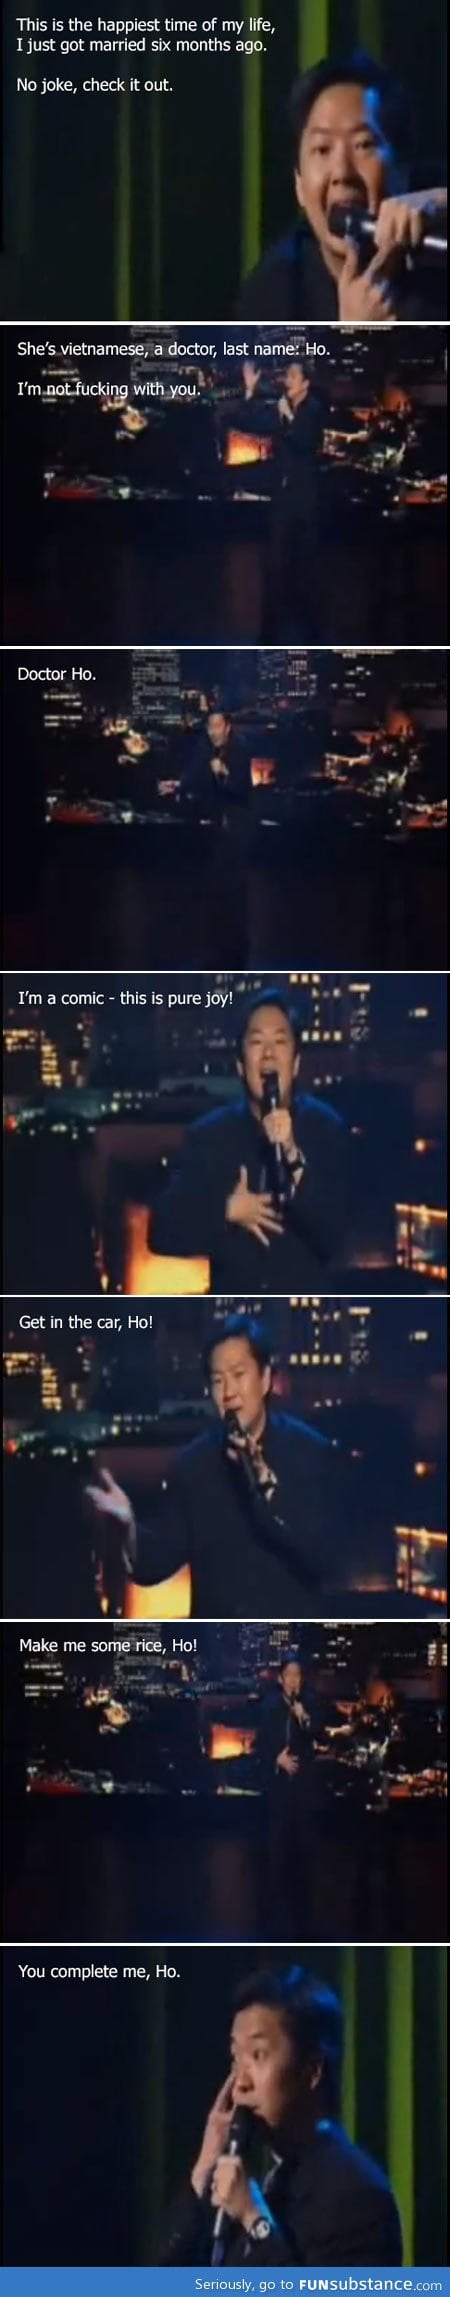 Ken Jeong on the joys of married life